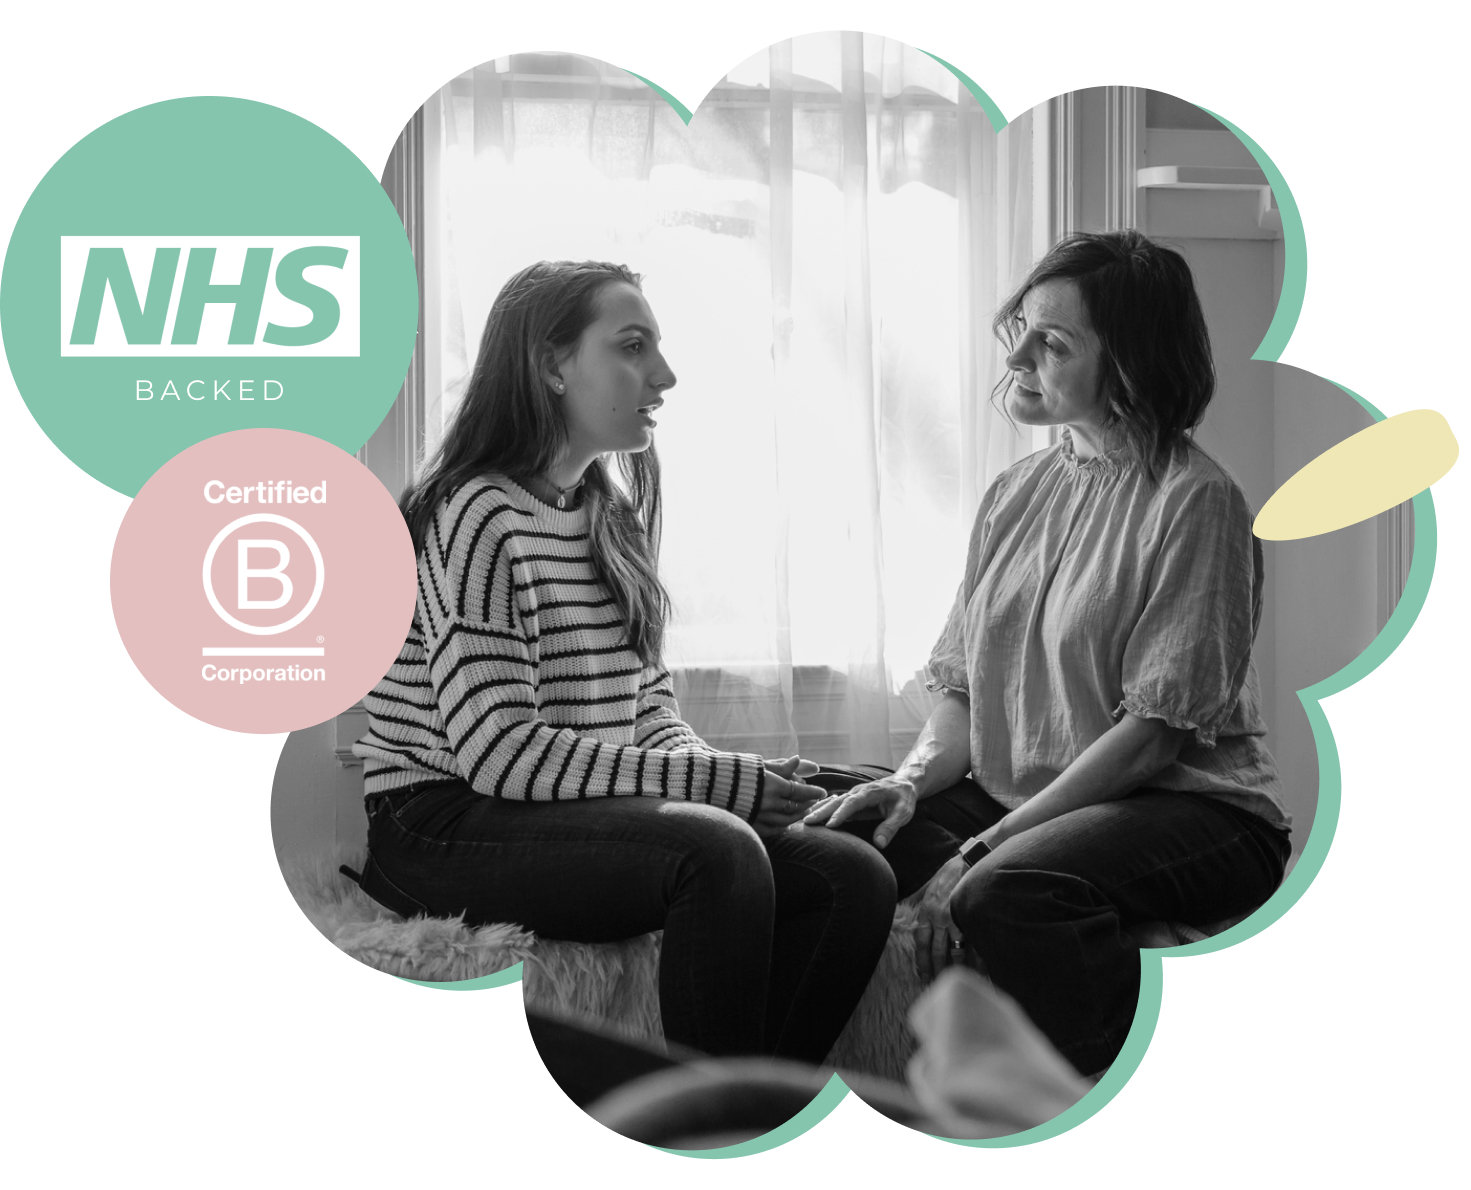 myHappymind Families mental health and wellbeing program with the NHS Backed and B Corporation Logos